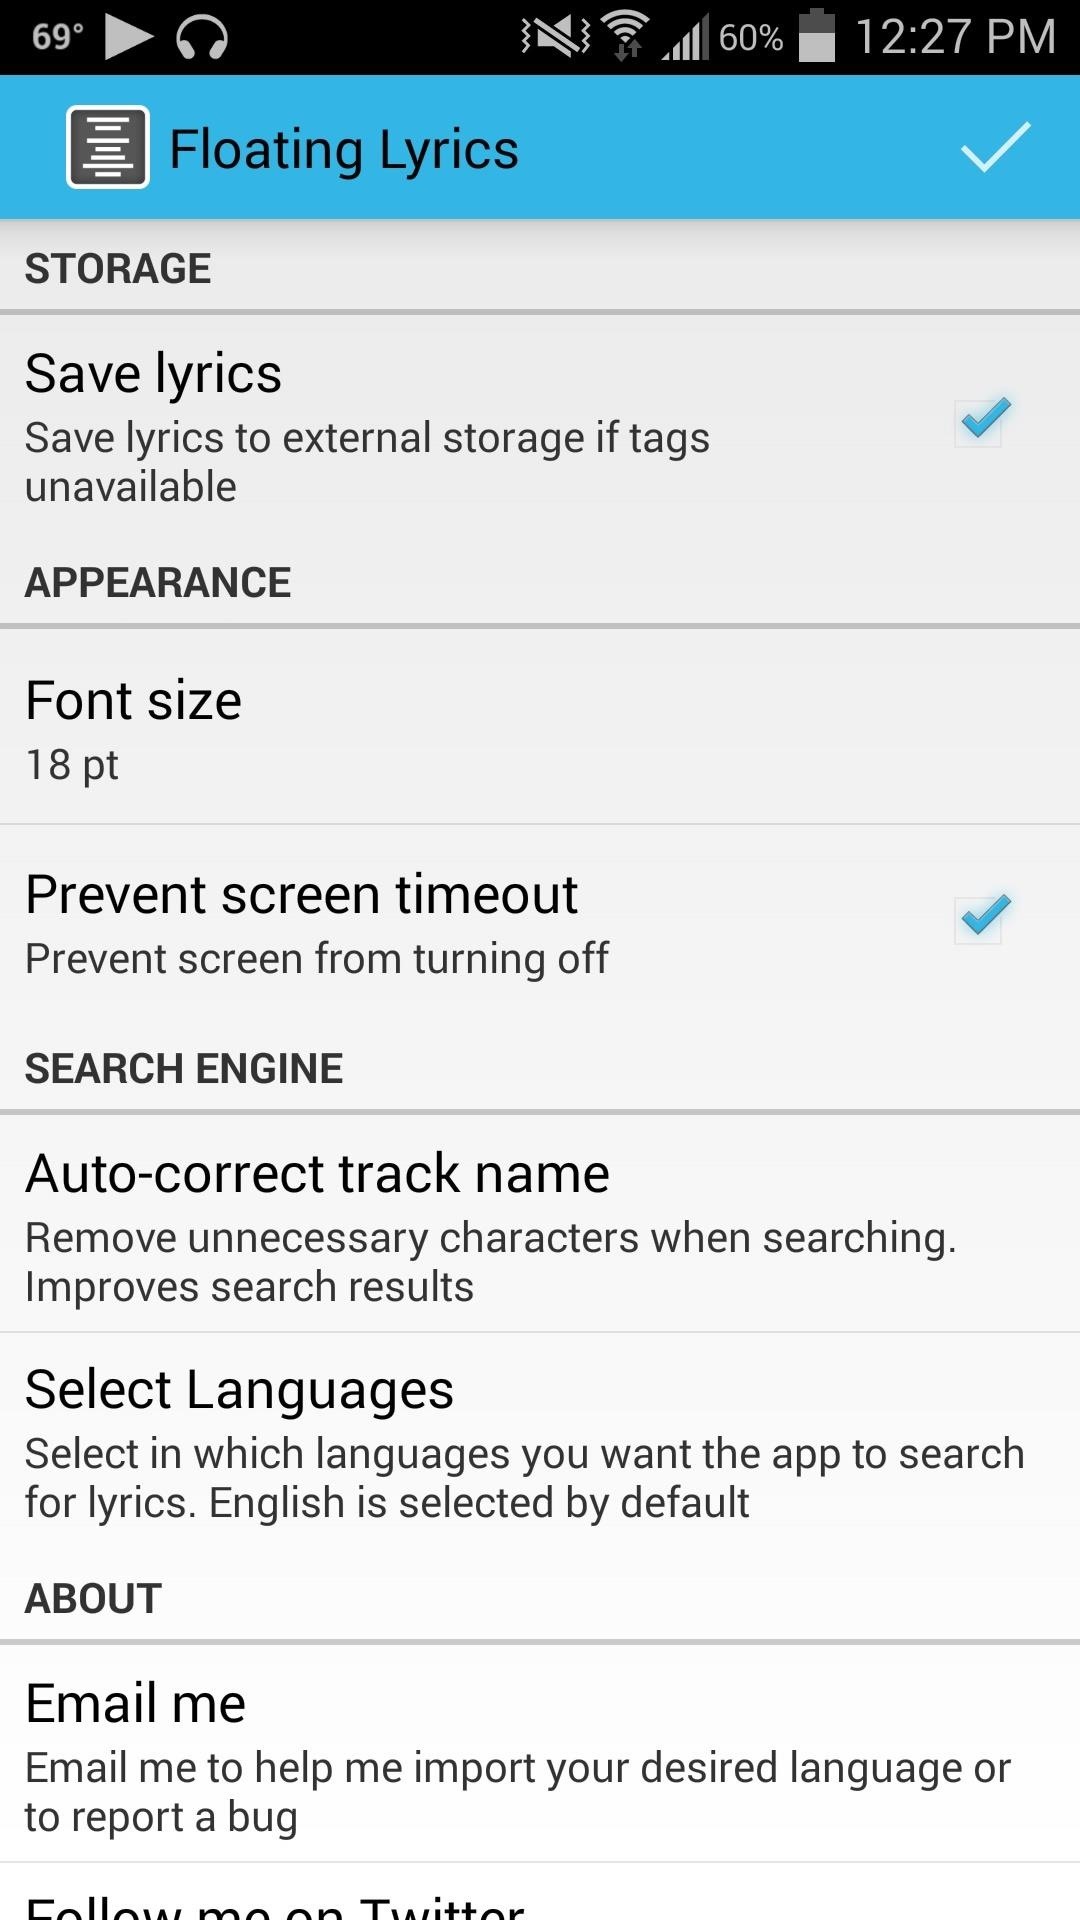 How to Add Floating Song Lyrics to Your Galaxy S4 to Sing Along from Any Screen